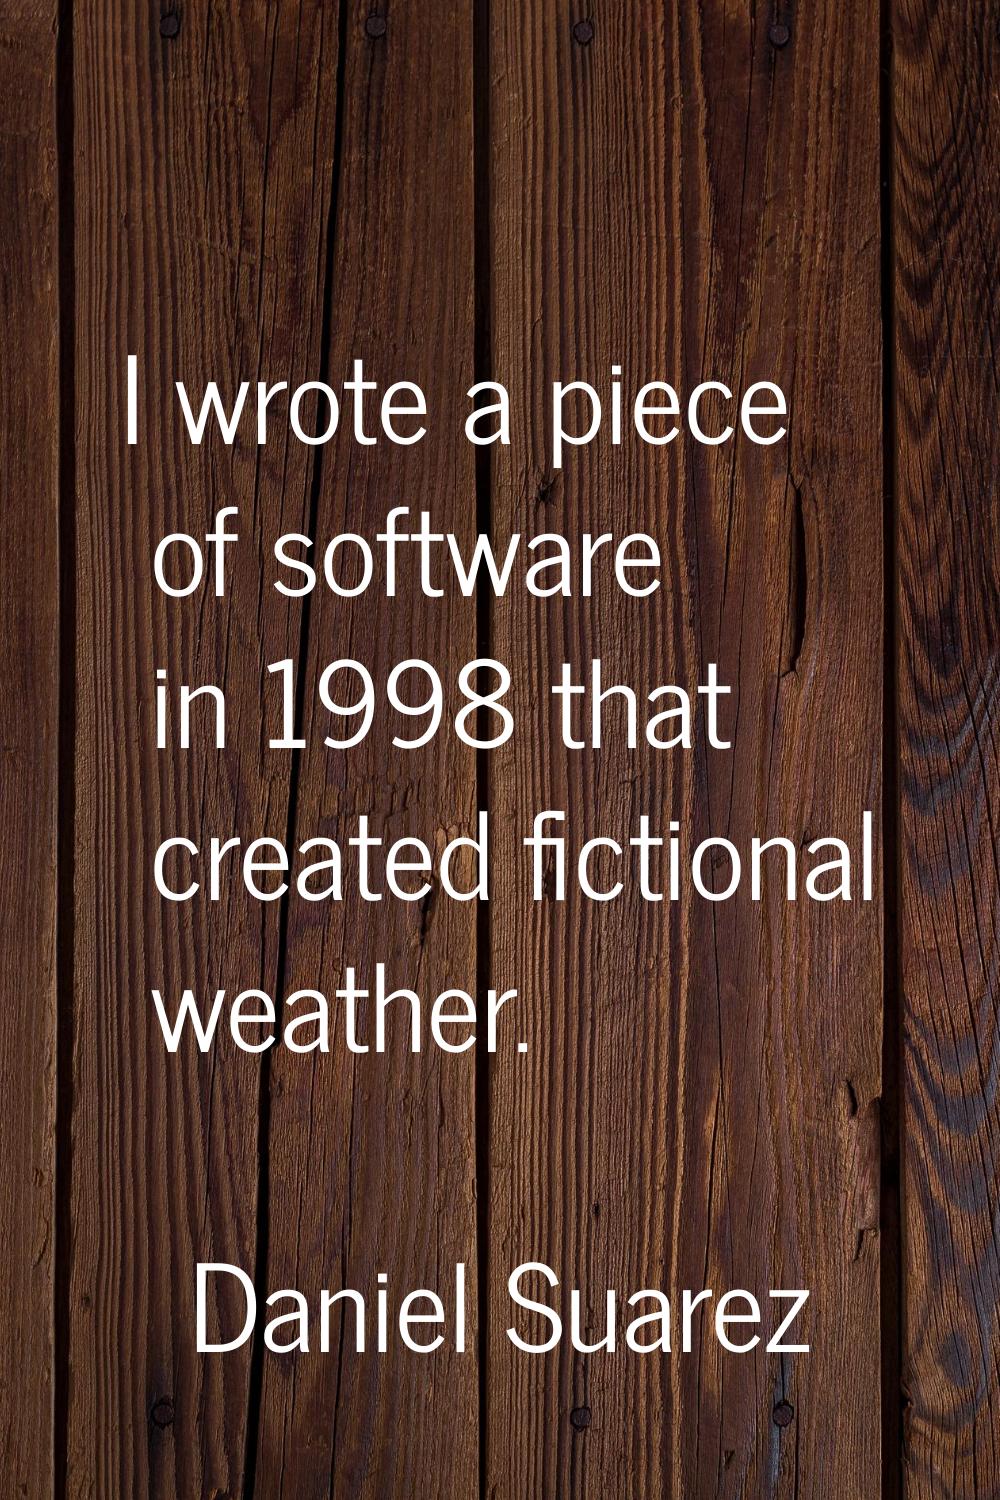 I wrote a piece of software in 1998 that created fictional weather.